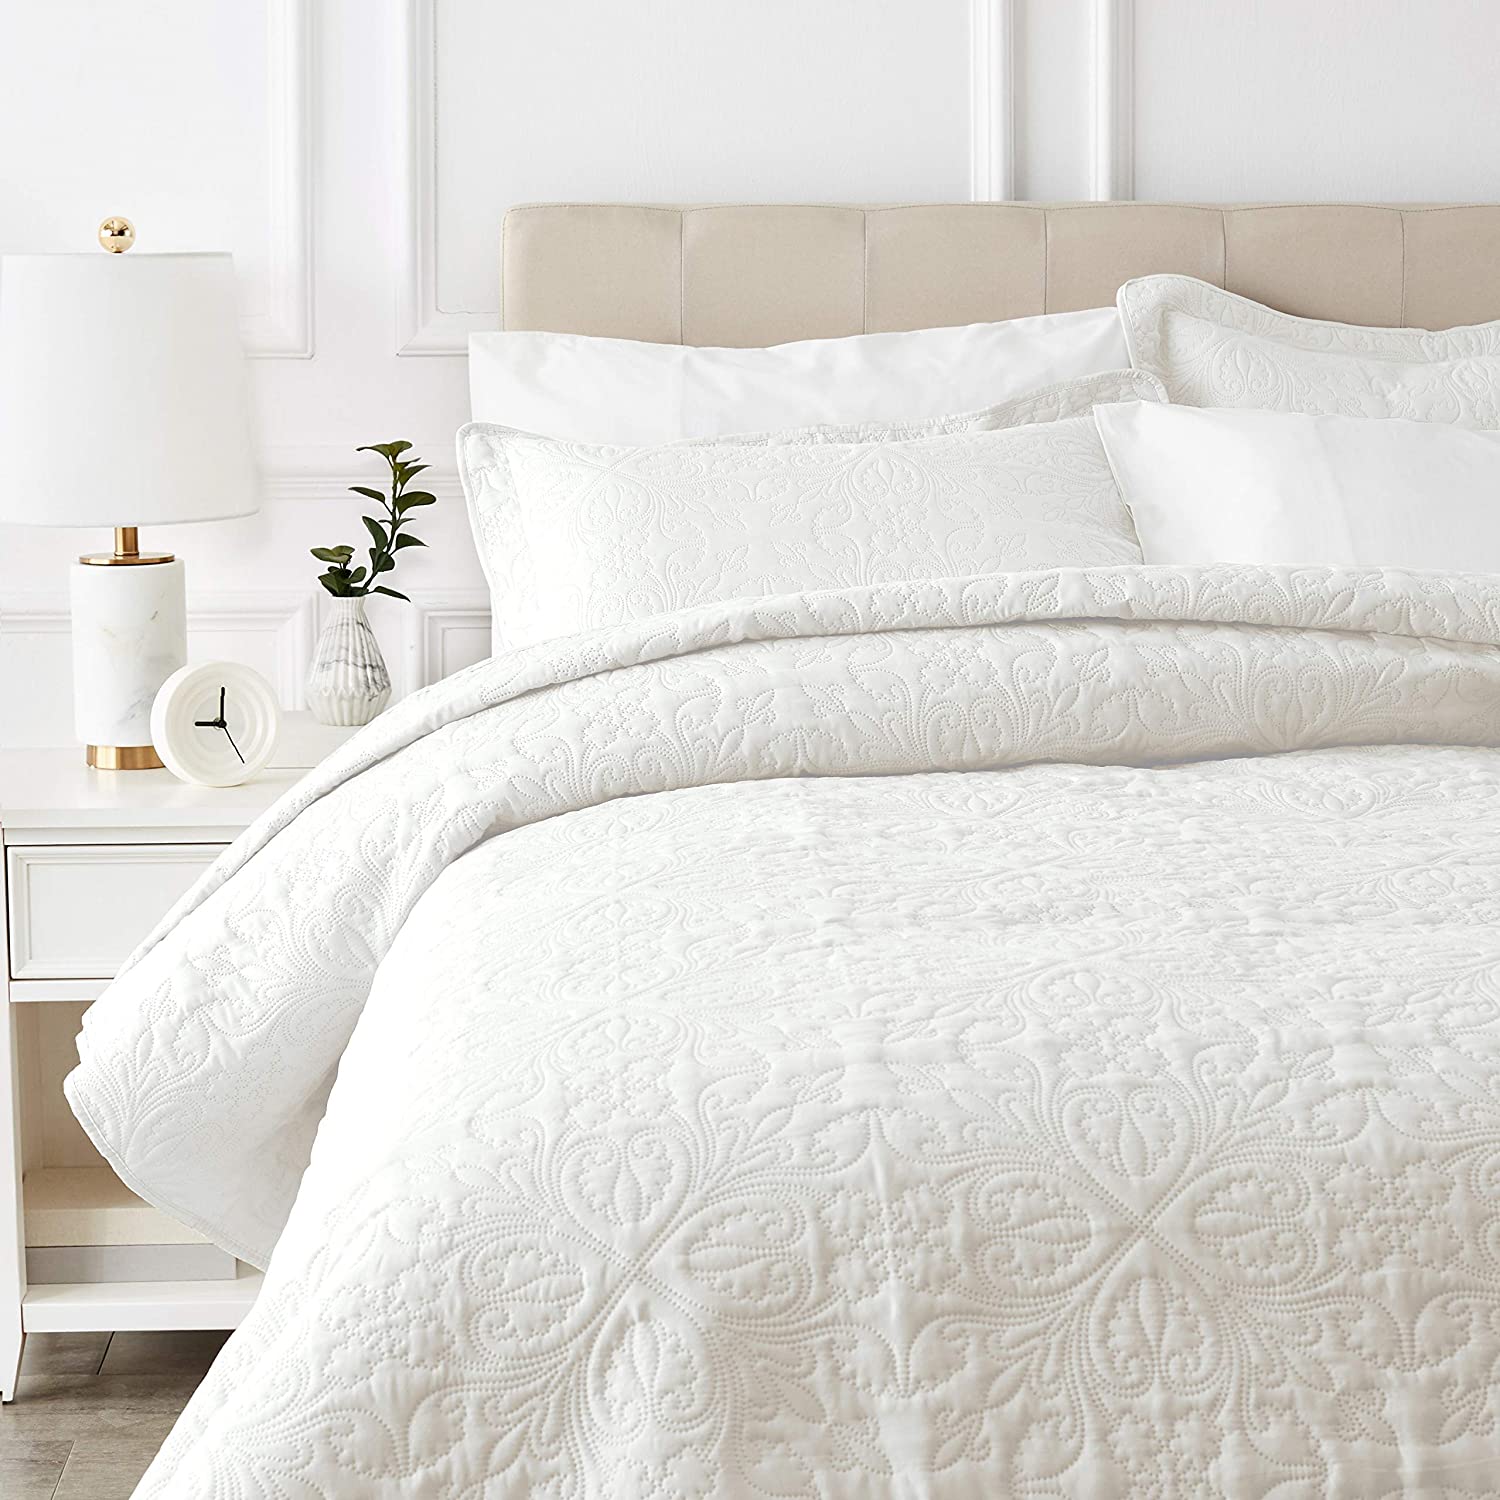 AmazonBasics Oversized Quilt Coverlet Bed Set (Twin) for ONLY $14.80